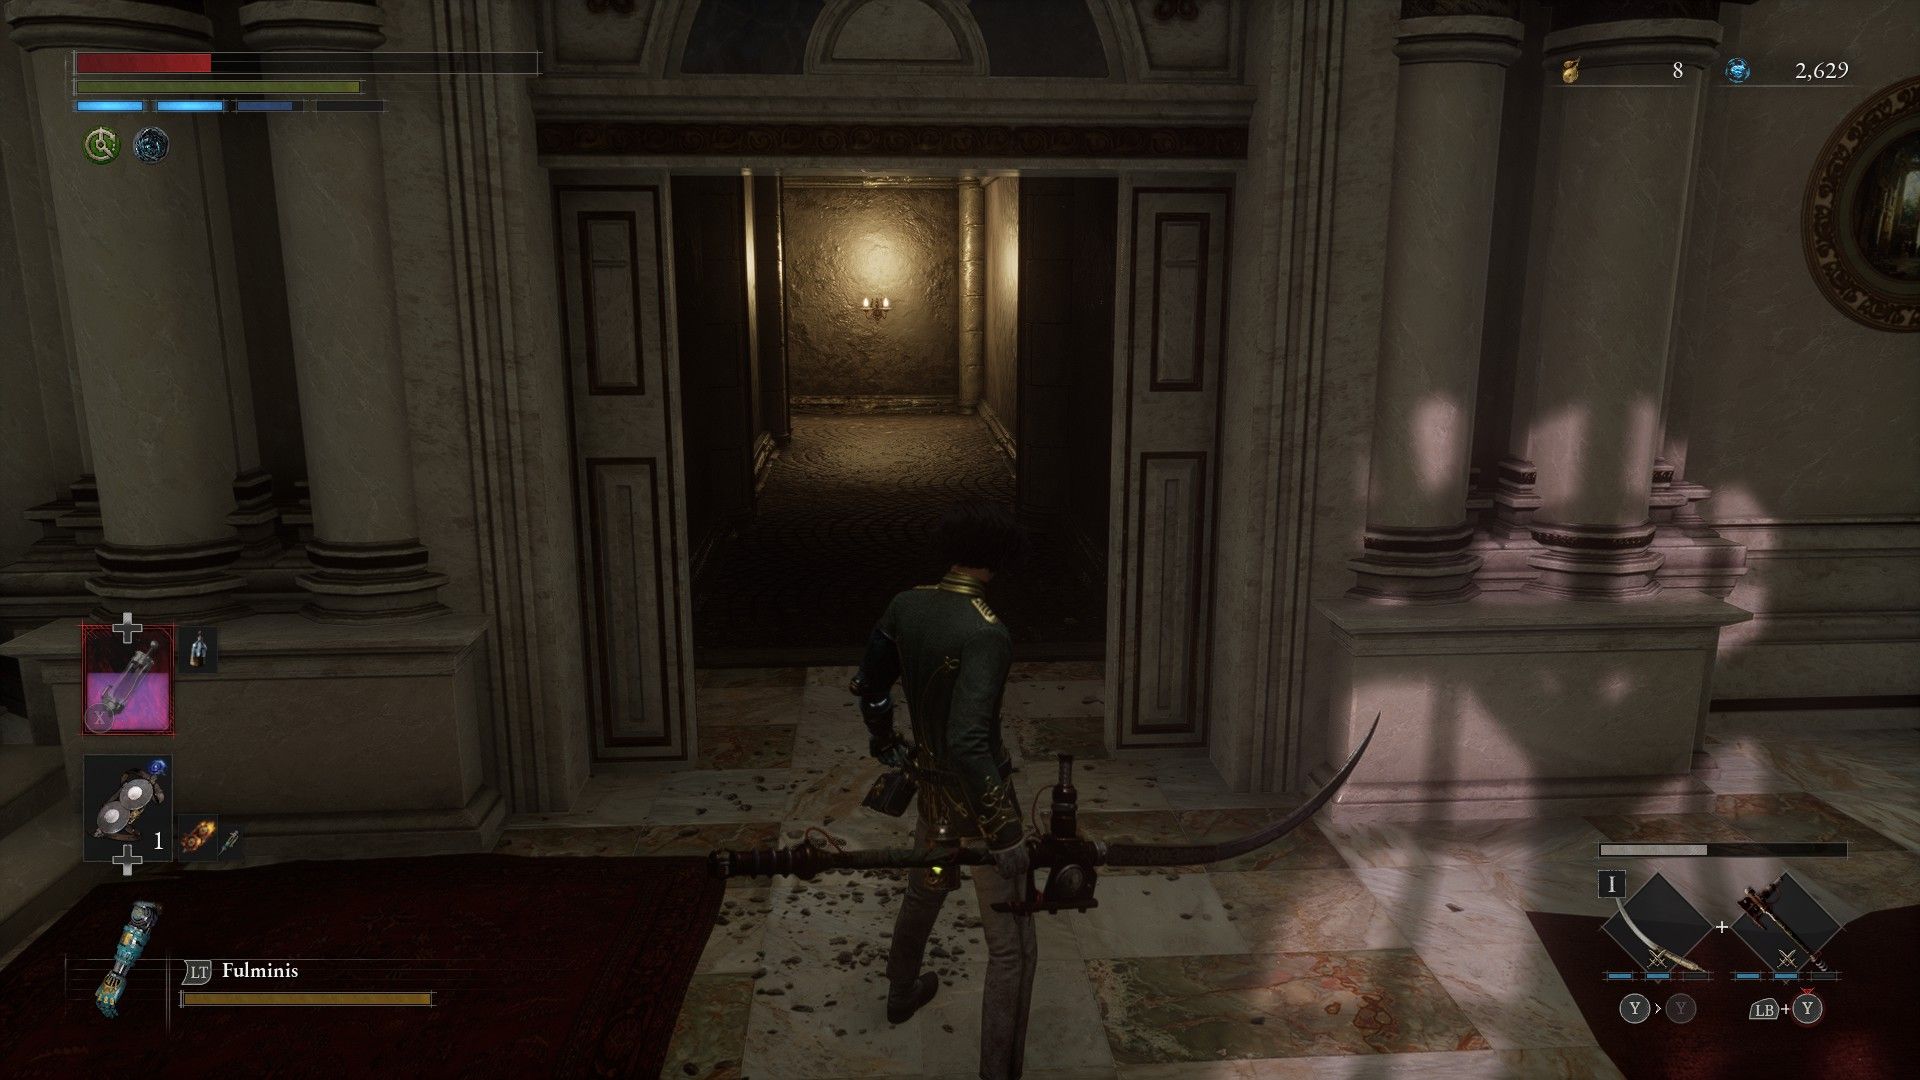 P faces dark hall that leads to Technique Amulet in the opera house in Lies of P